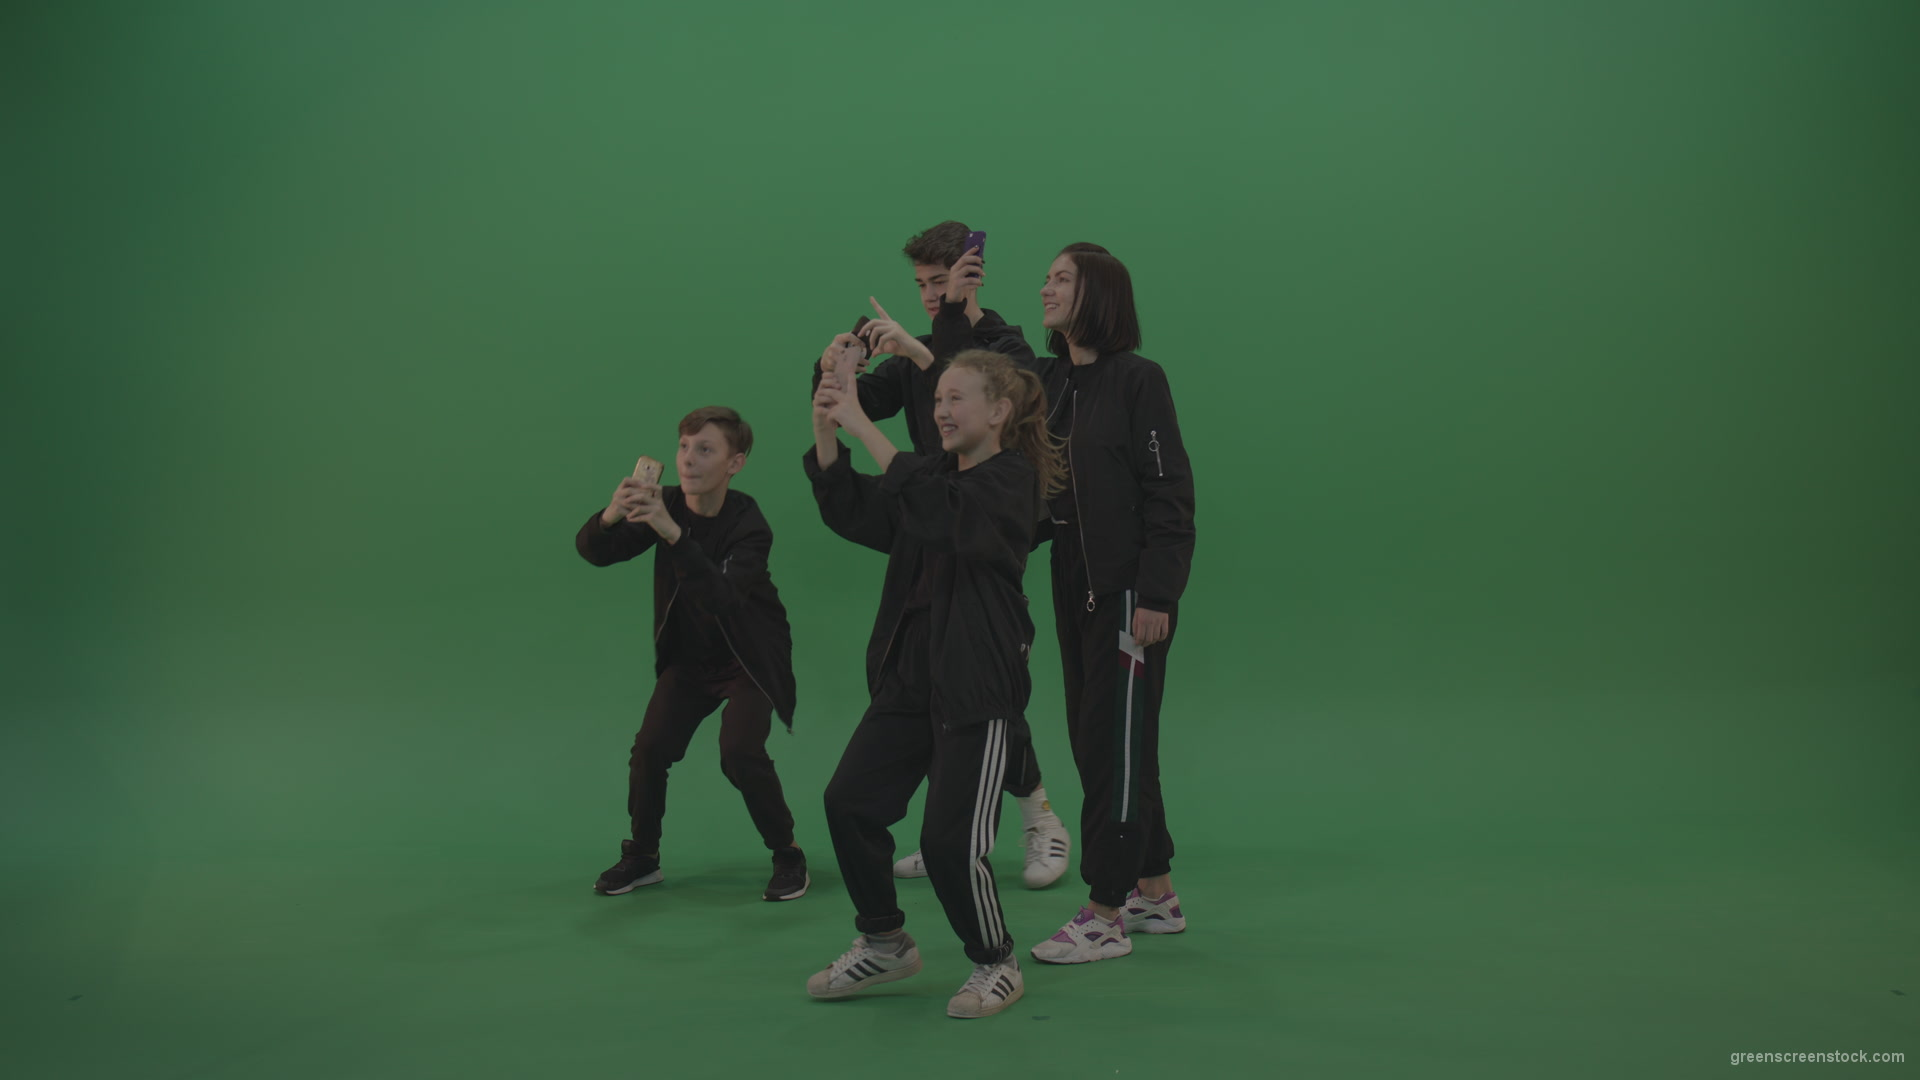 Four-kids-in-black-wears-take-pictures-over-chromakey-background_006 Green Screen Stock